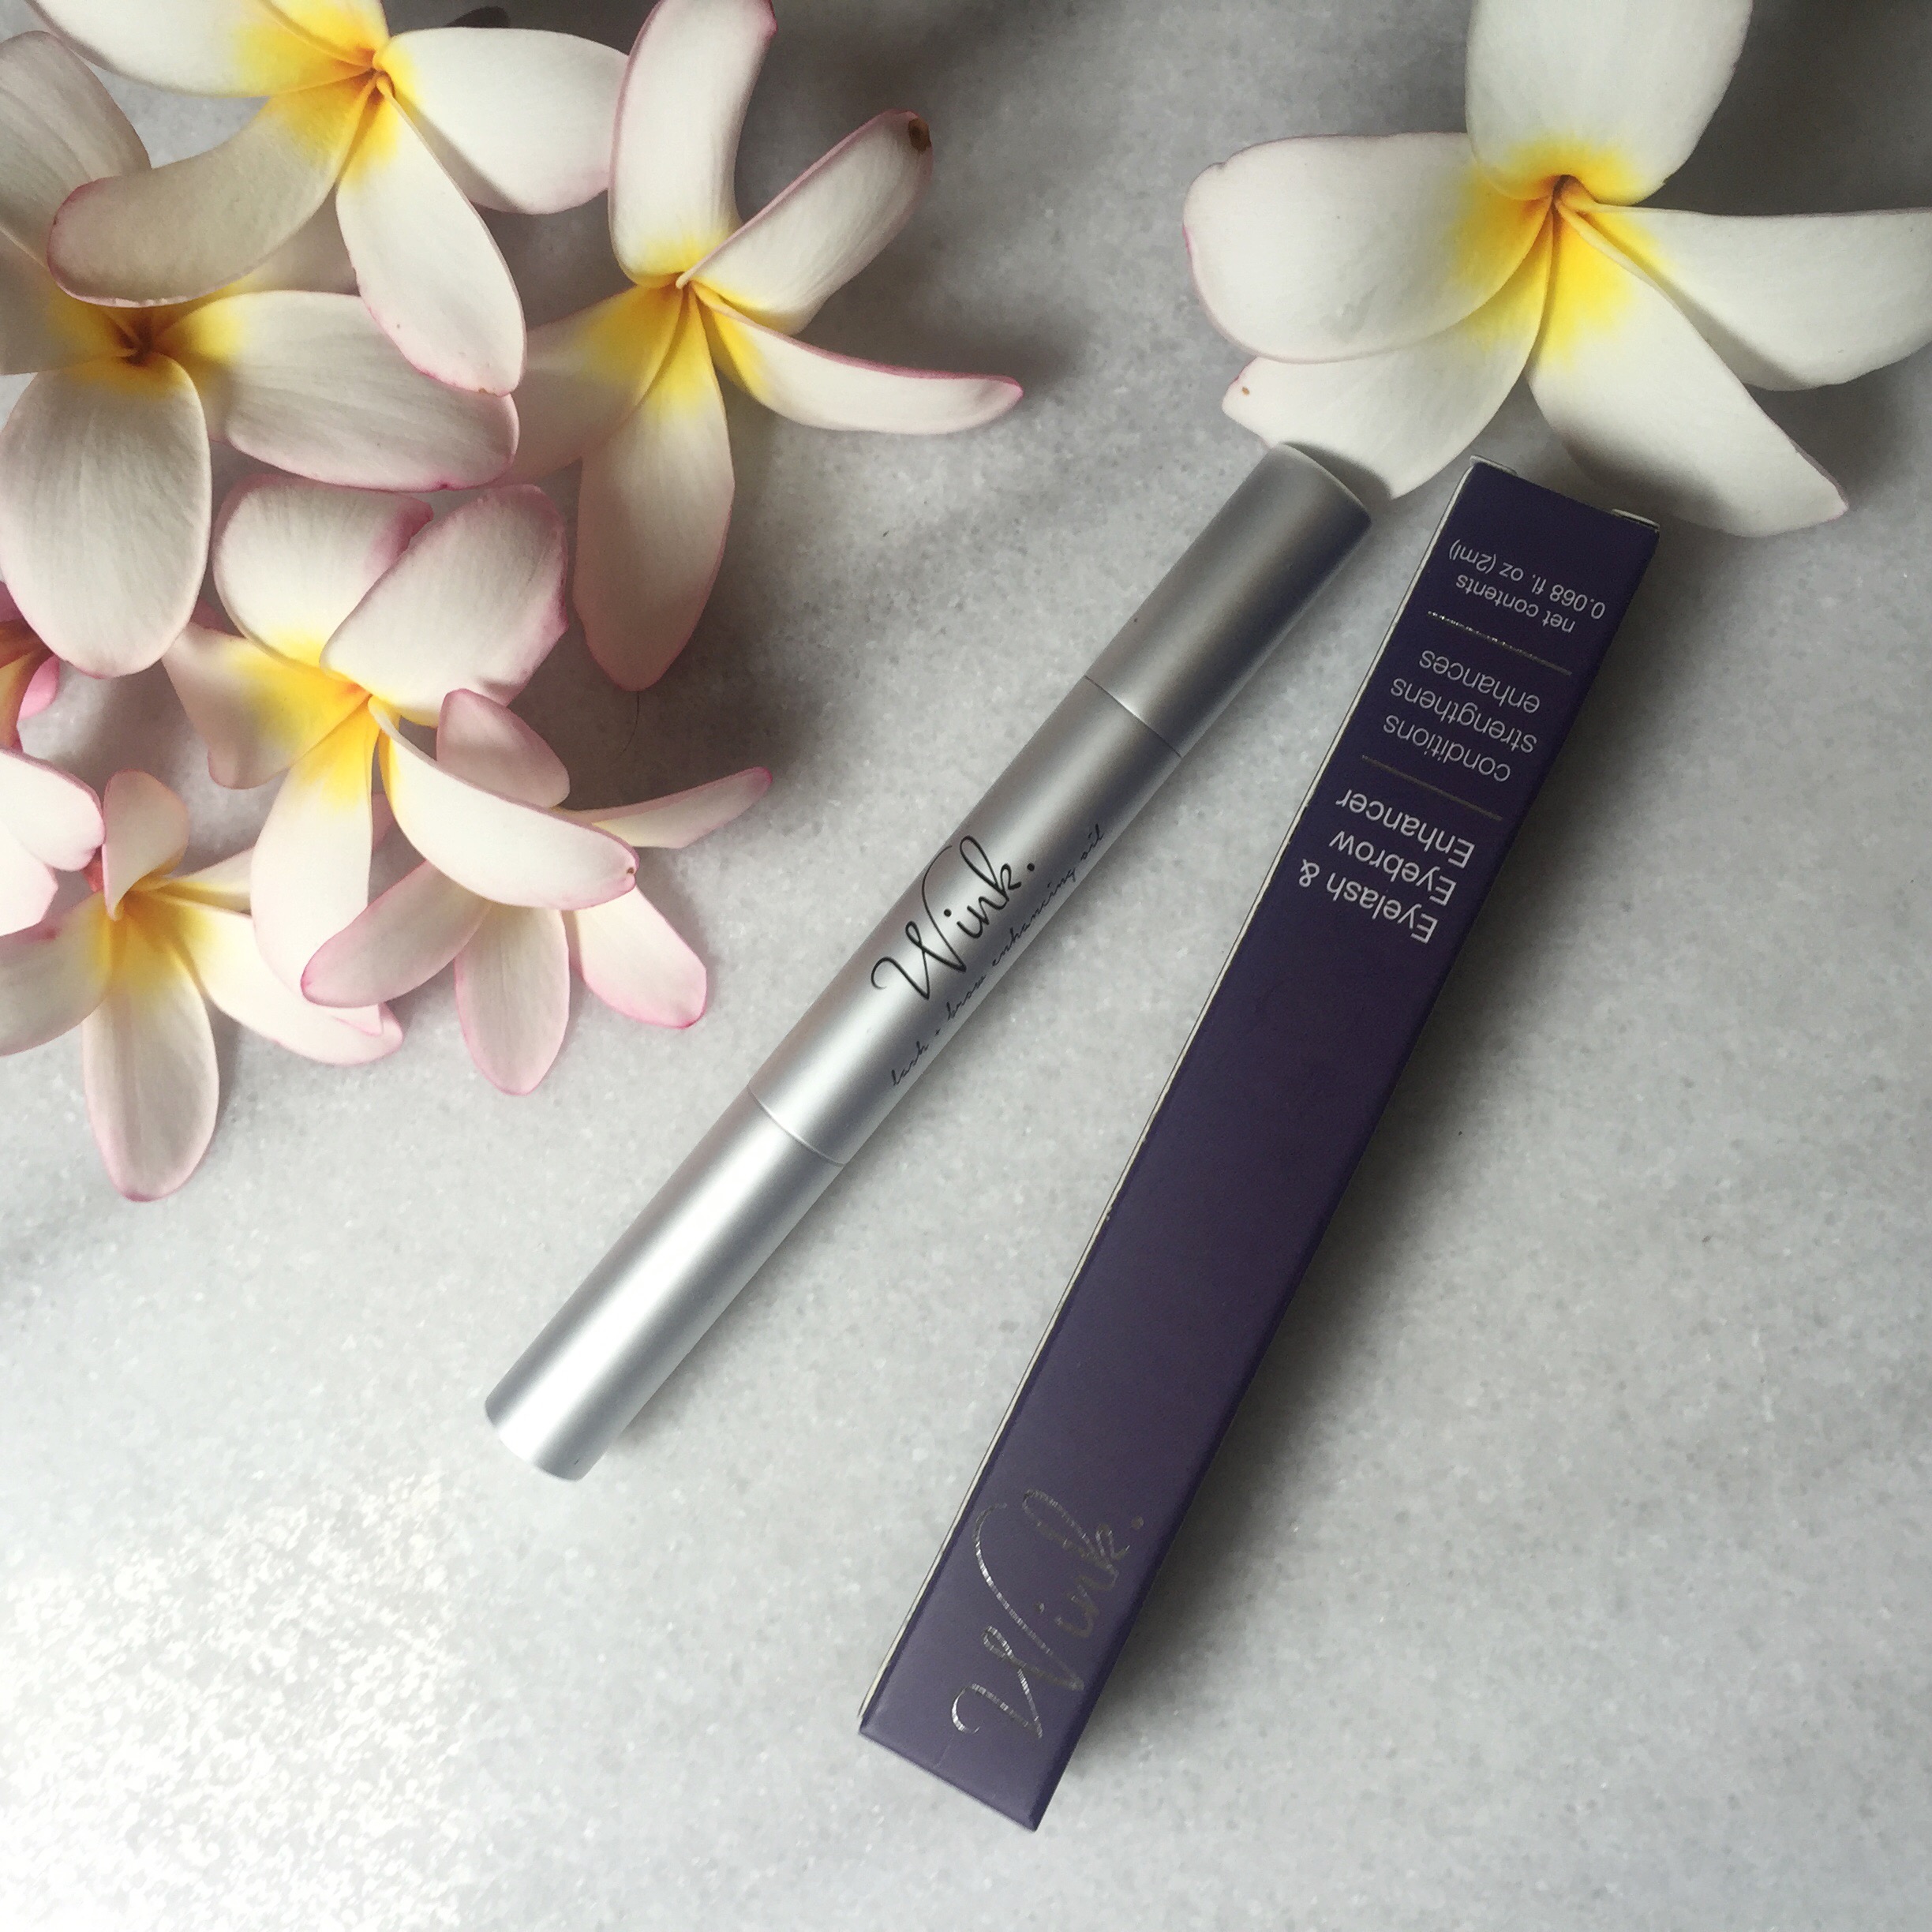 WINK organic lash and brow oil